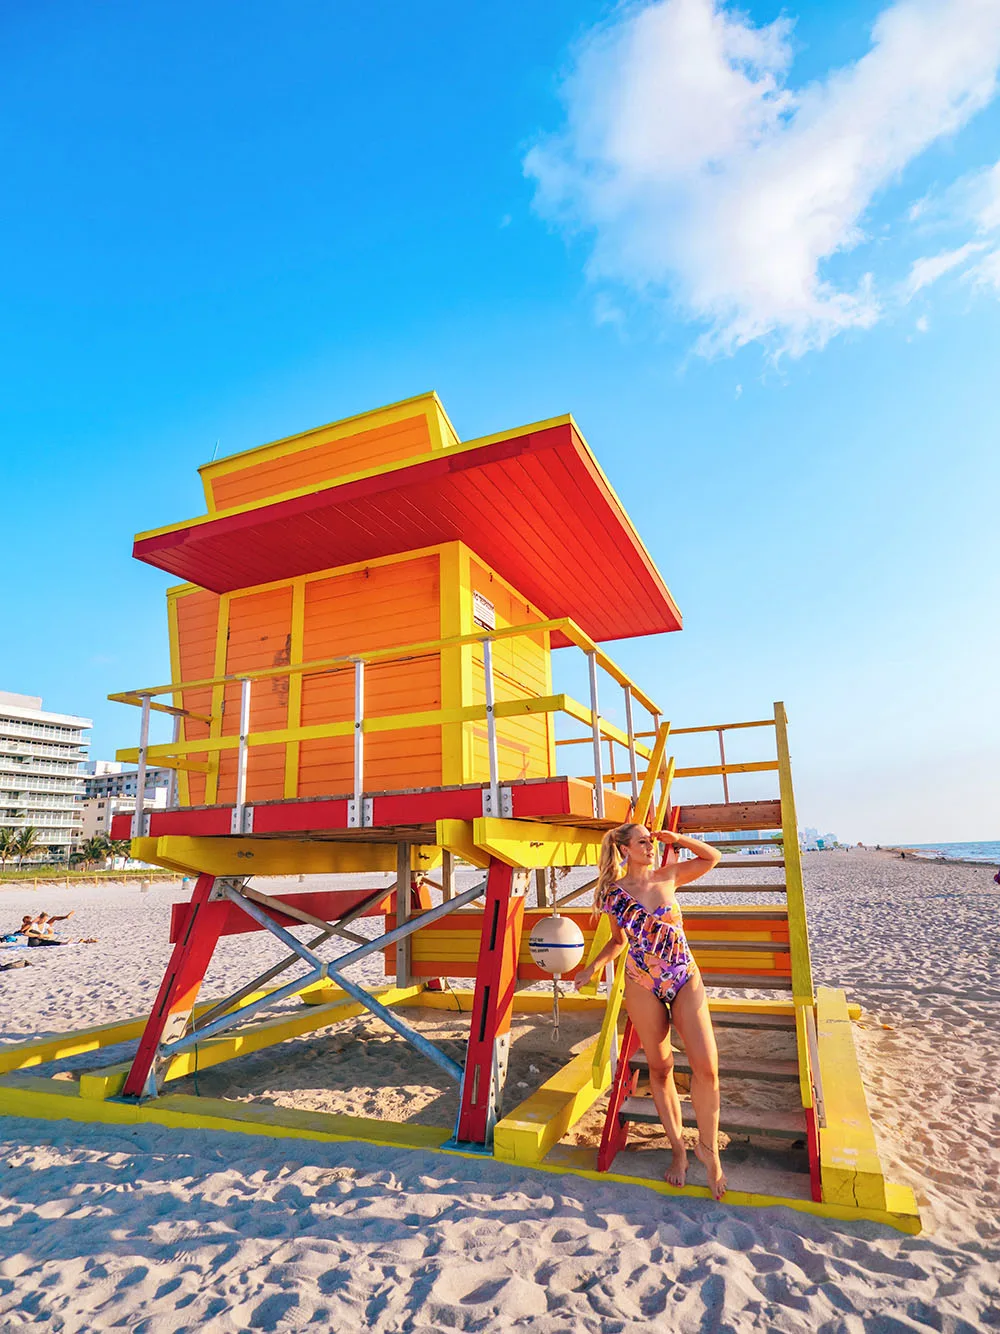 So you've planned a wonderful 4 day trip to Miami and now you're looking for the perfect itinerary for your visit… well, this guide is for you! I’ve put together the ultimate 4 days in Miami itinerary that will have you seeing and experiencing all of Miami’s top sights and attractions. From South Beach to Little Havana, the Wynwood Arts District to the Everglades, and even a day trip to Key West! This really is the perfect 4 day itinerary to get the most out of your time in Miami. Pictured here: South Pointe Beach